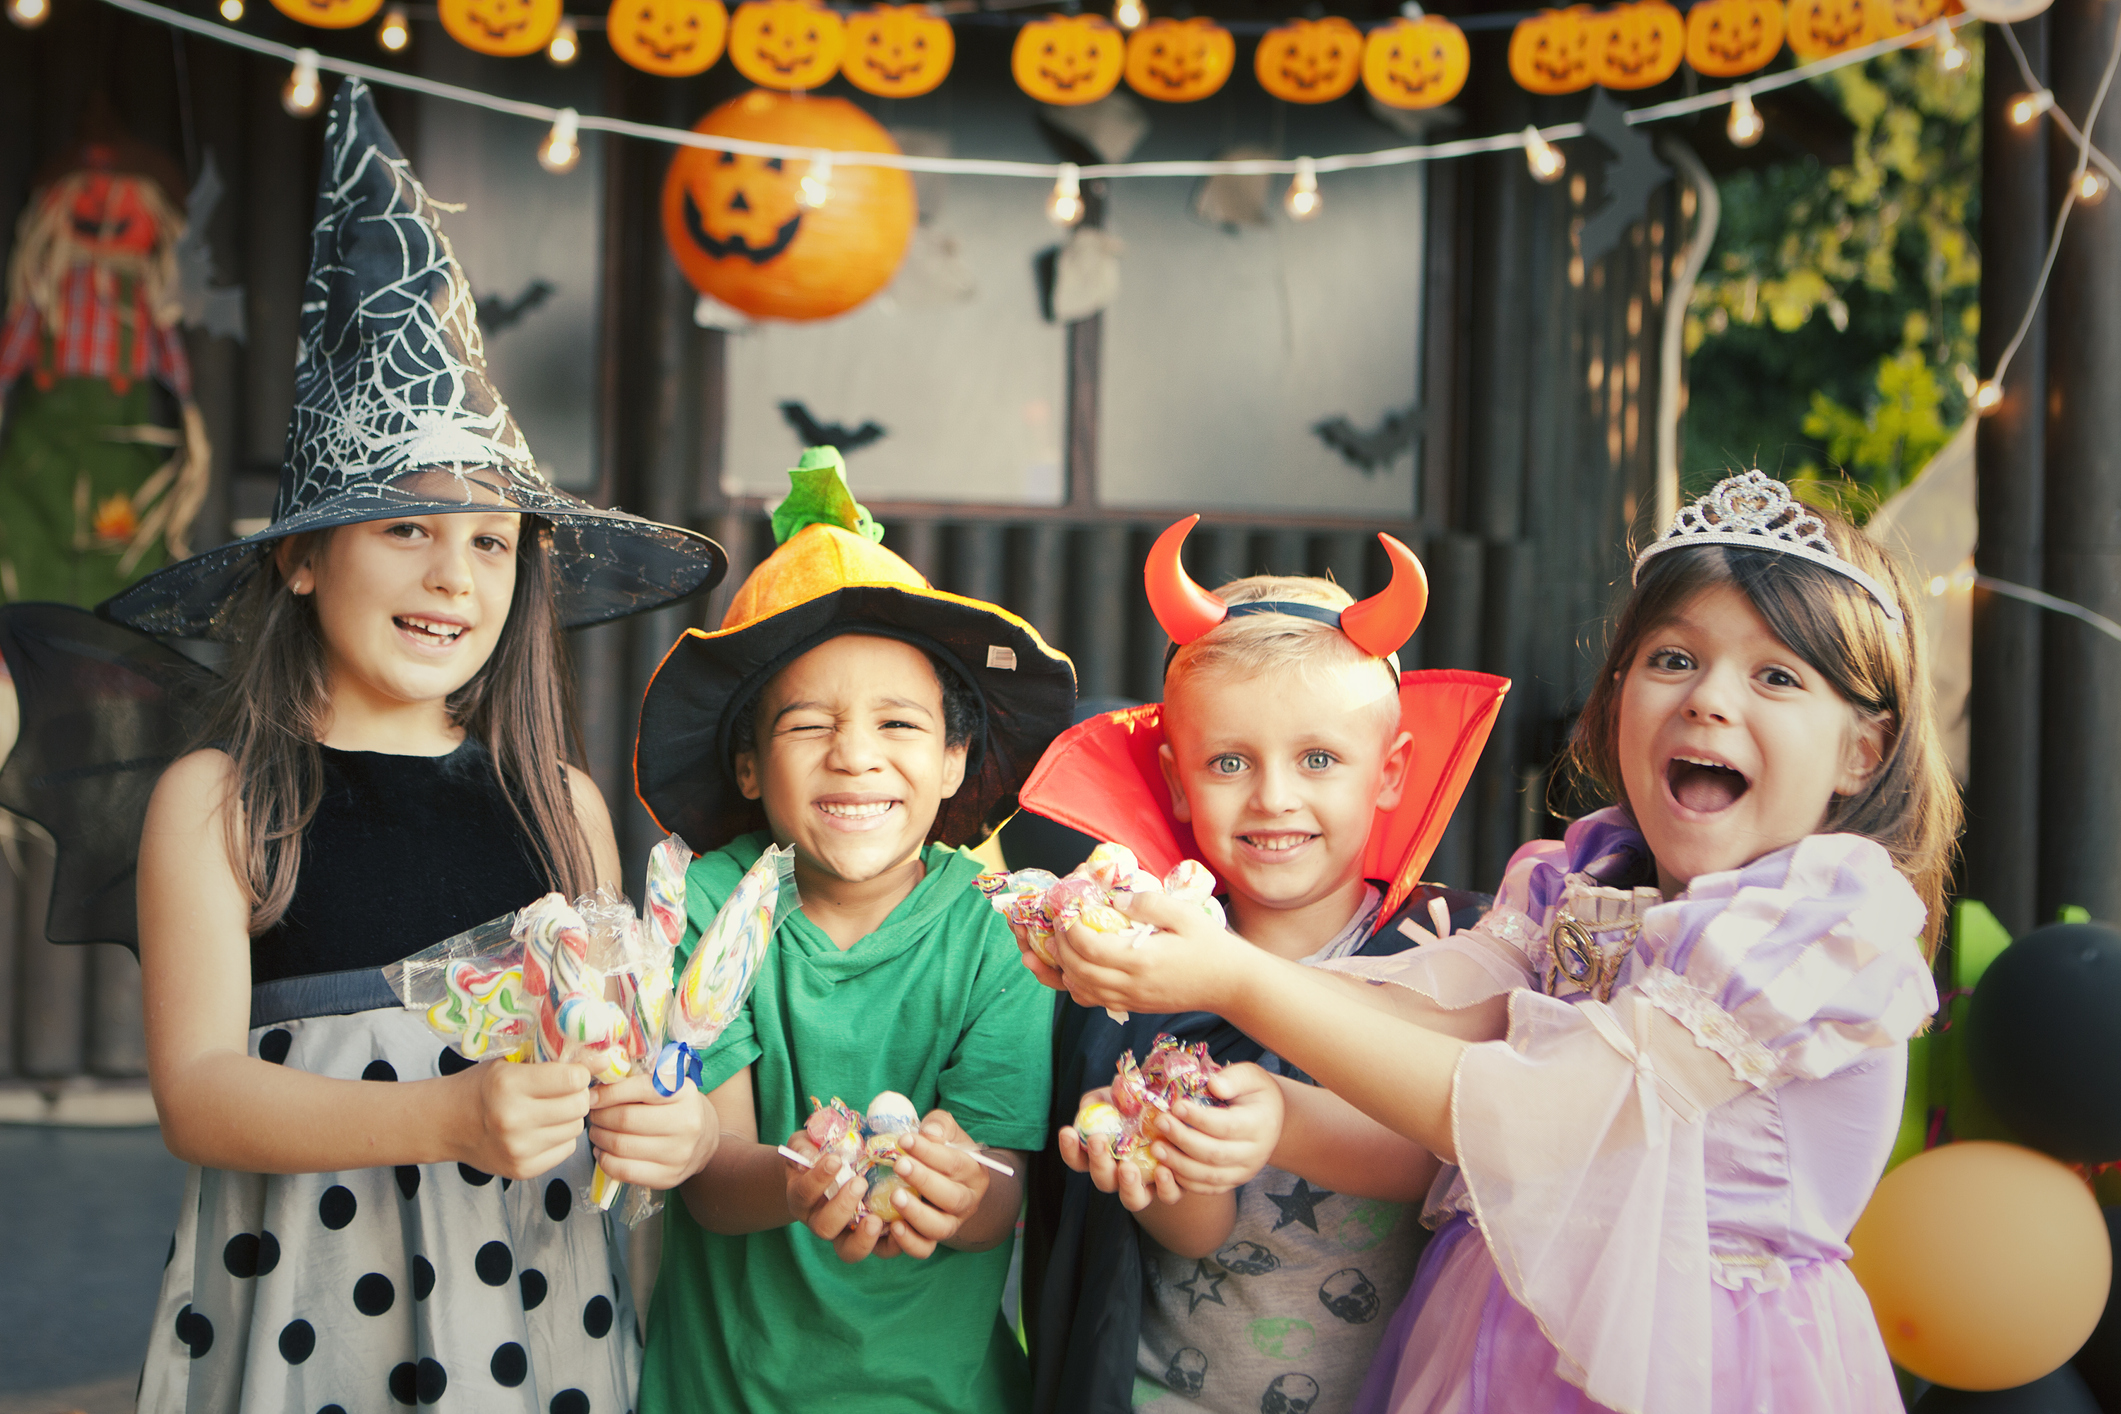 kids enjoying trick or treating at a halloween event in myrtle beach in october.jpg